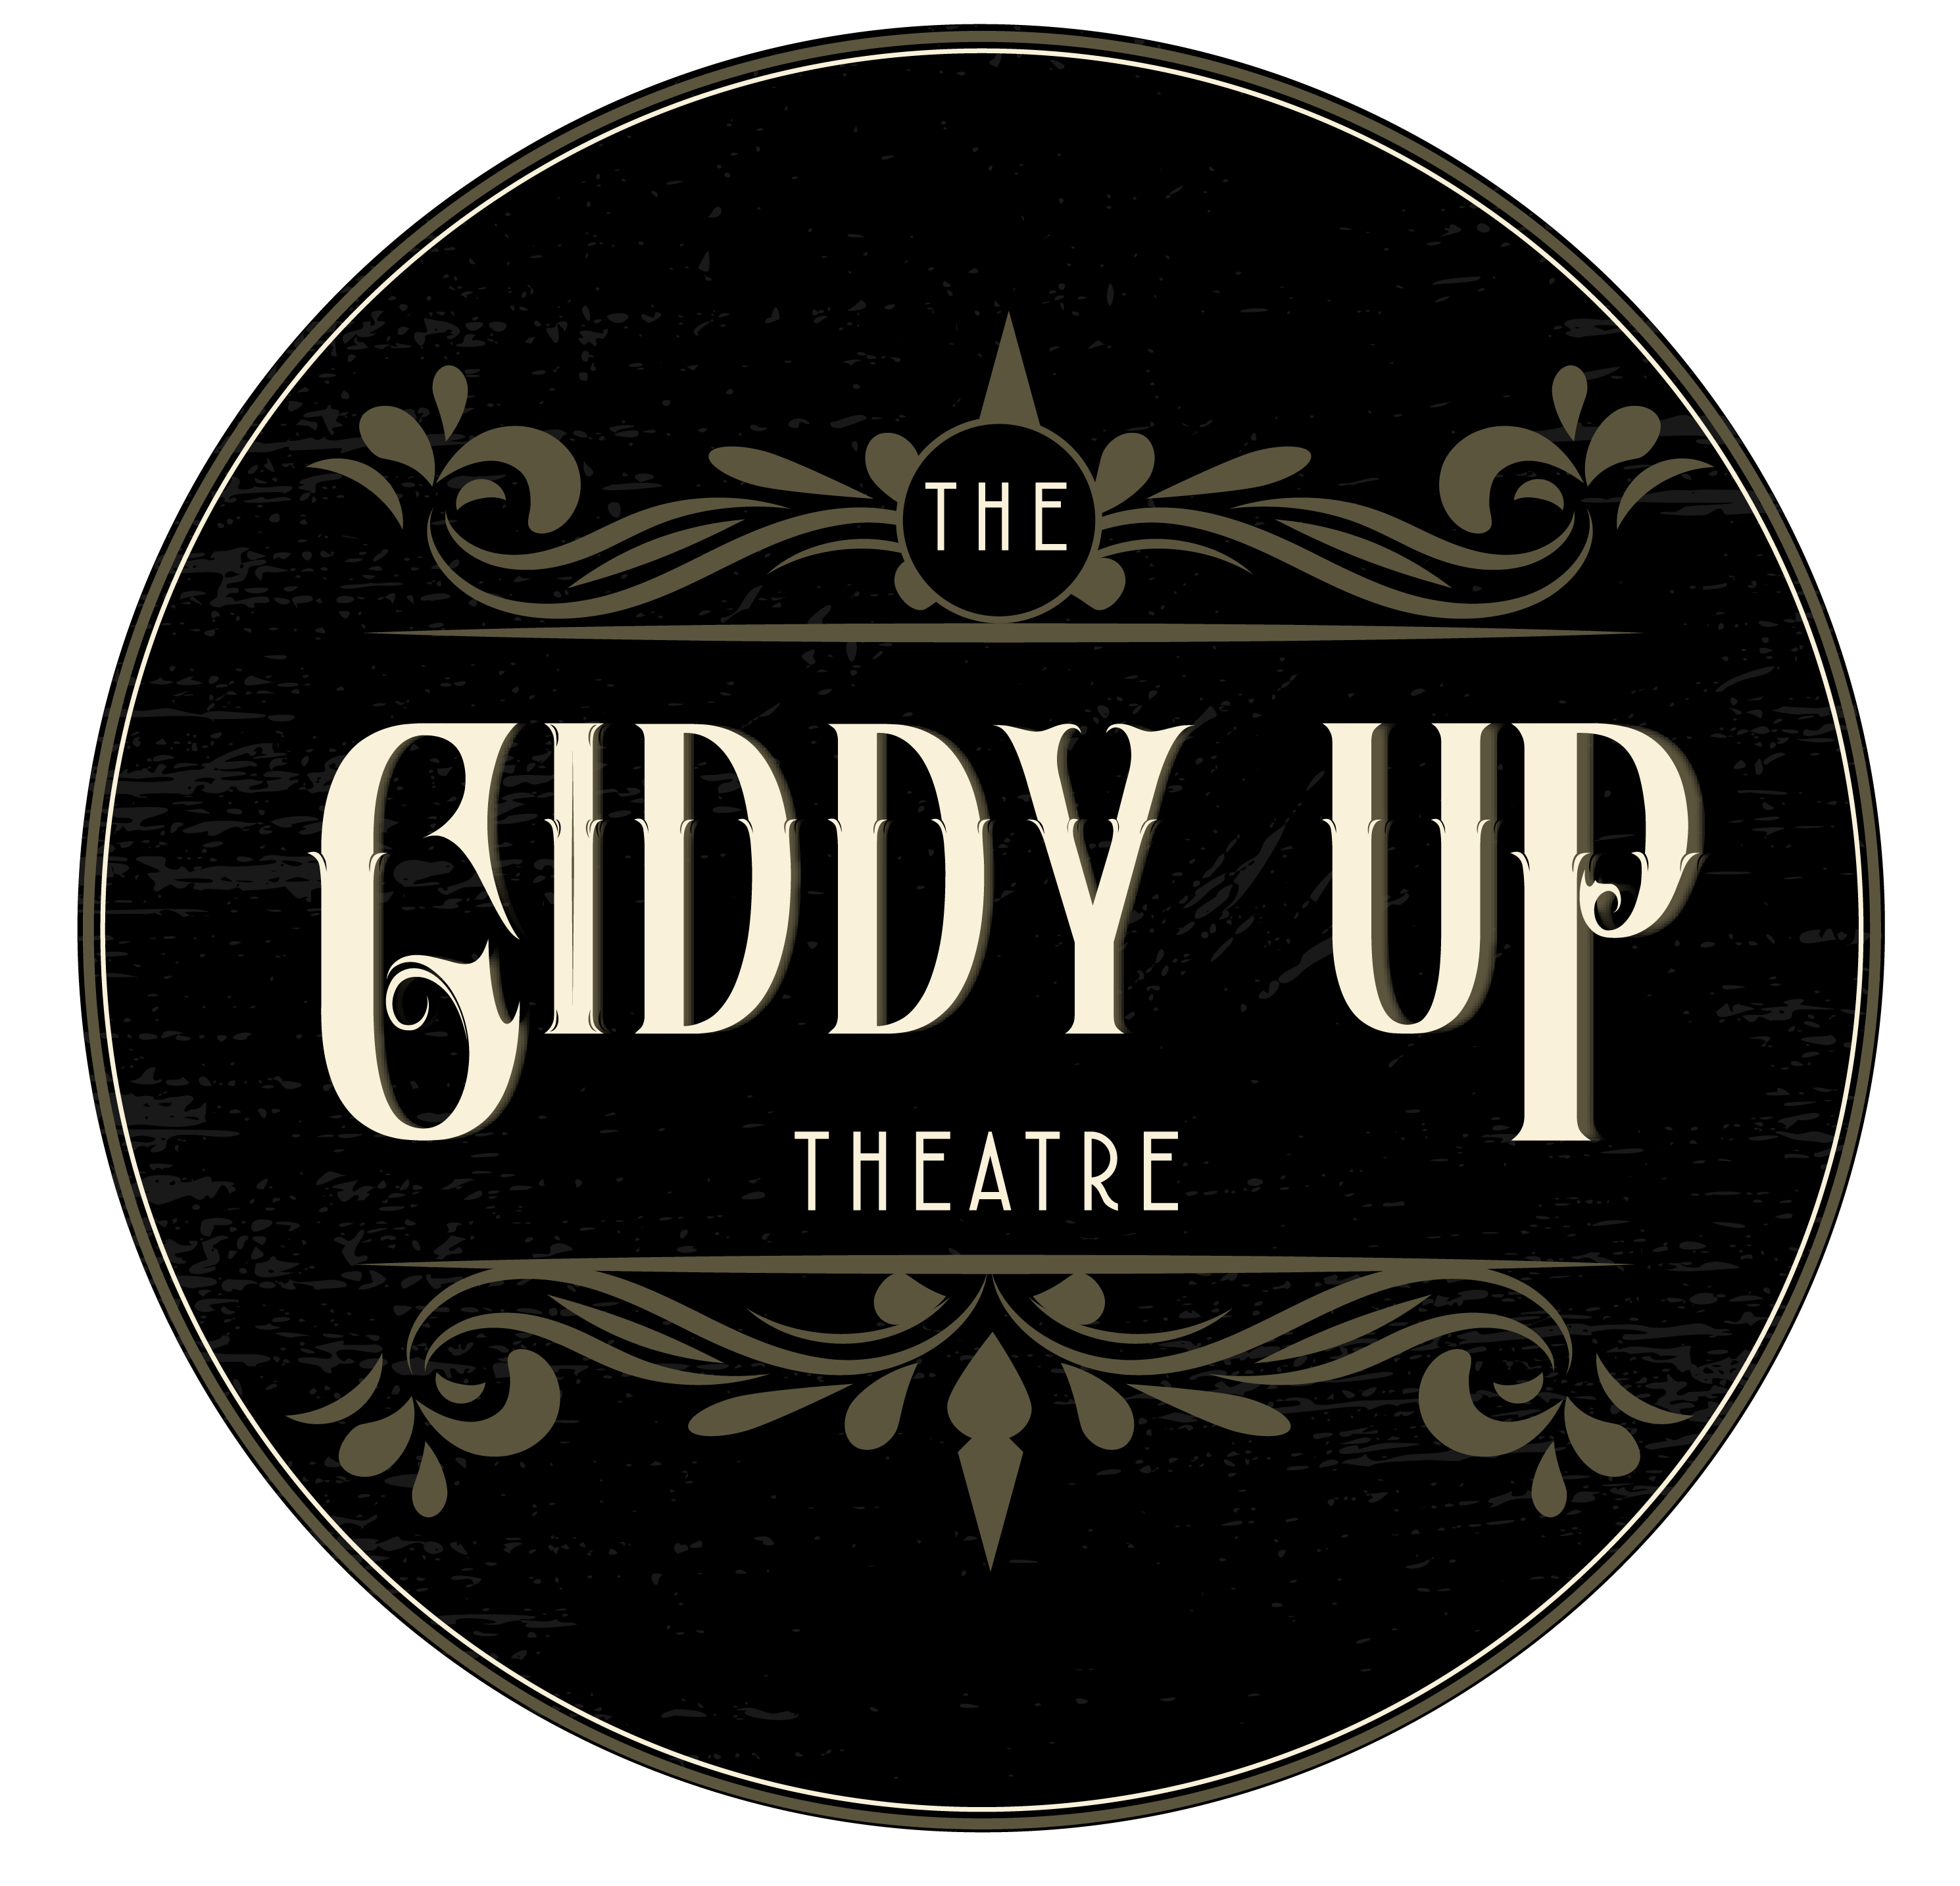 Giddy Up Theatre